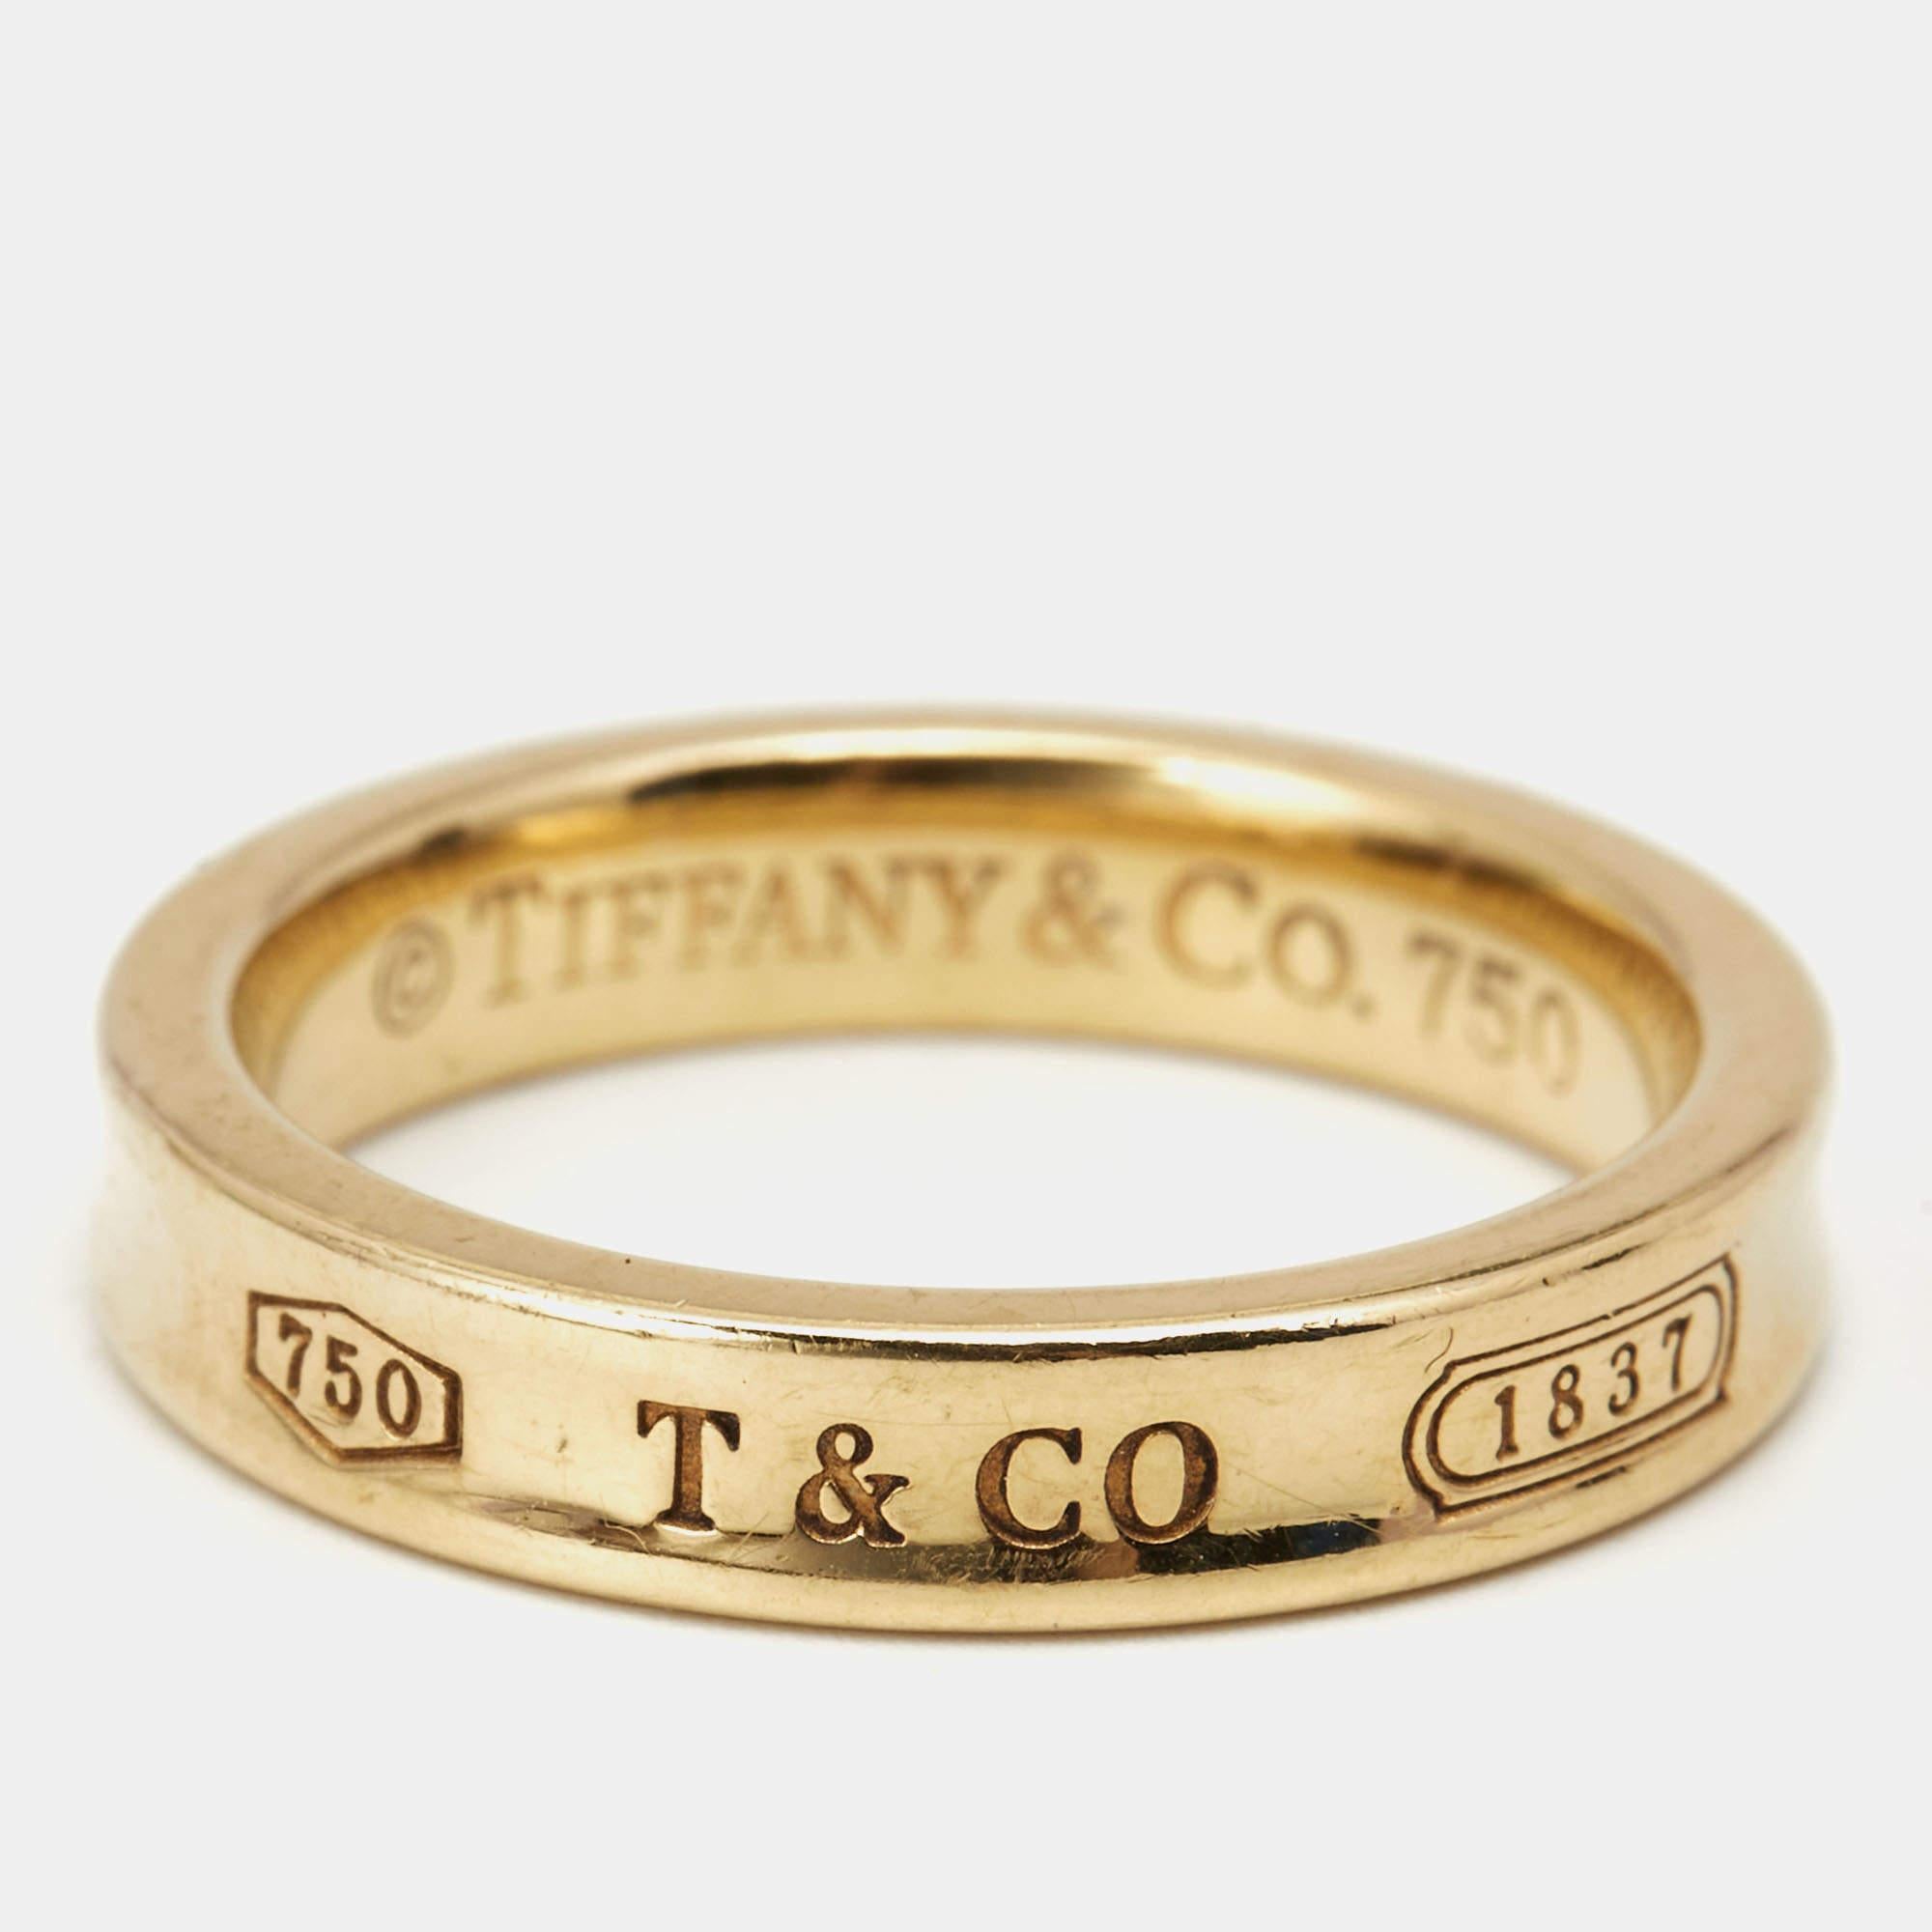 We'd love this Tiffany & Co. piece to complement our everyday style. The ring is made of 18k yellow gold and inscribed with logo details, and 1837—the year the brand was founded. It has a smooth finish and a comfortable fit.

Includes: Original